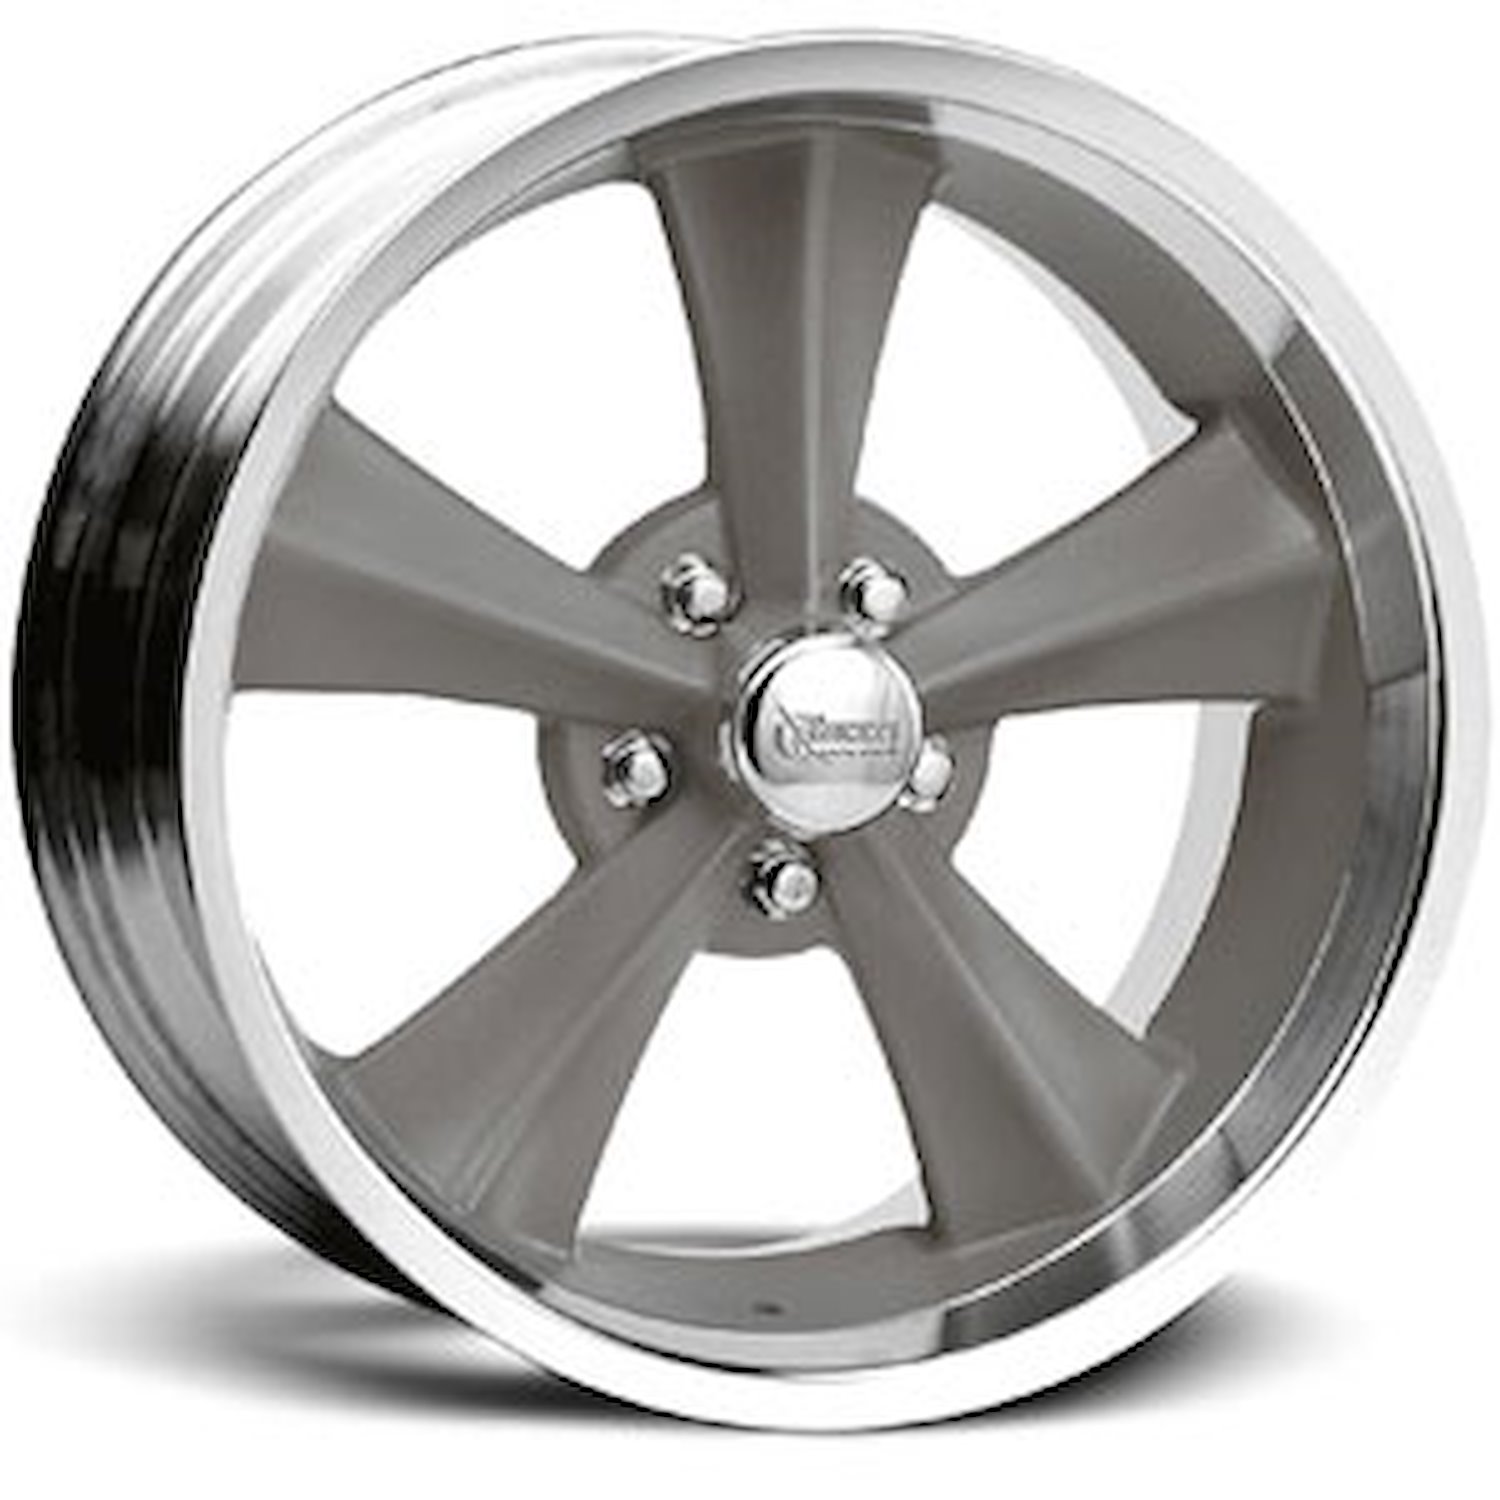 Booster Wheel - Gray Size: 17" x 7"